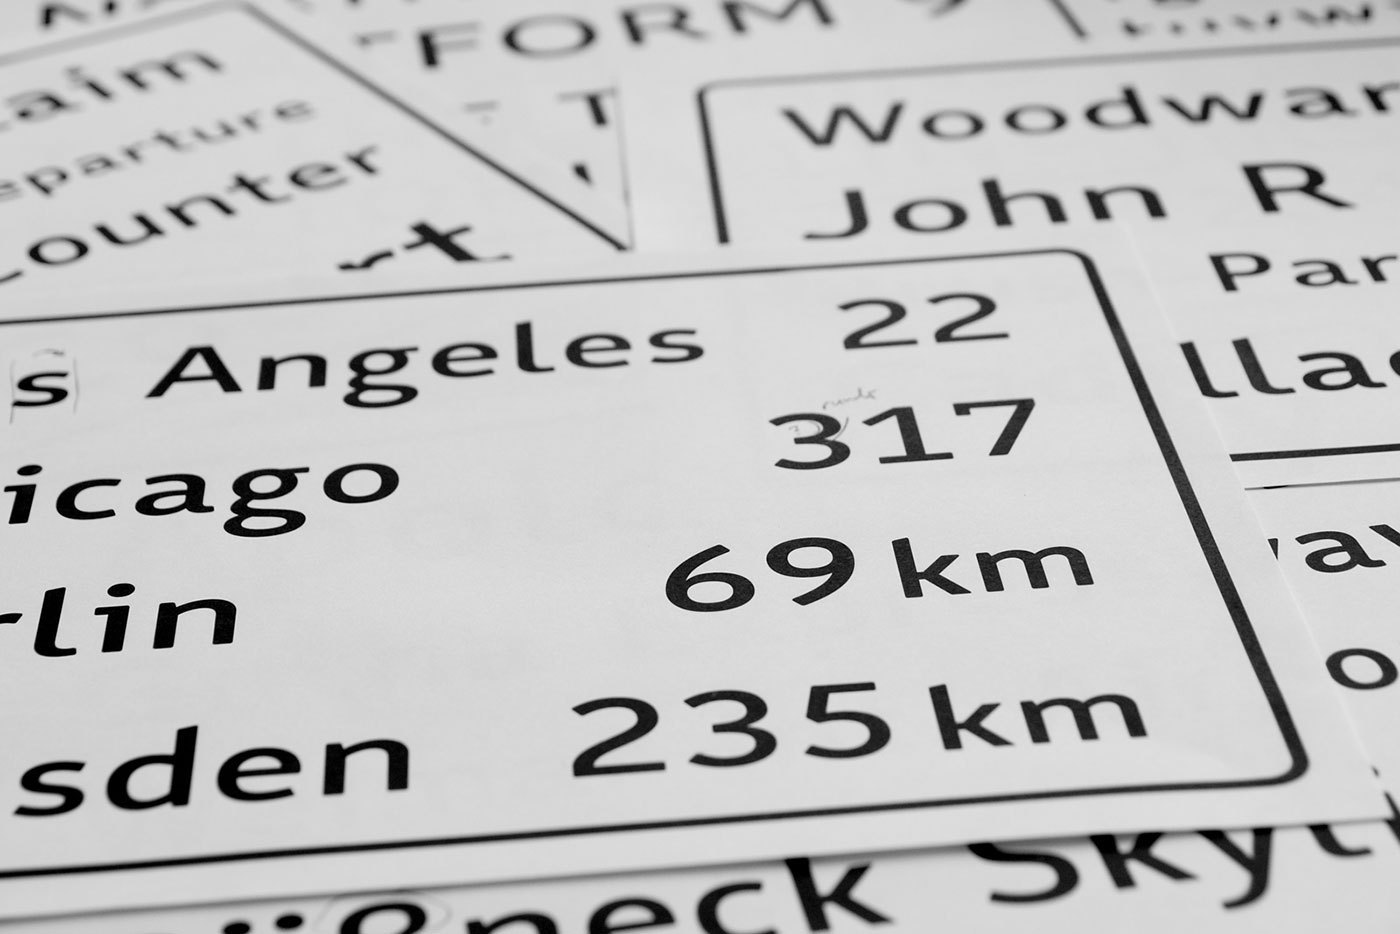 More information about "Designing the ultimate wayfinding typeface"